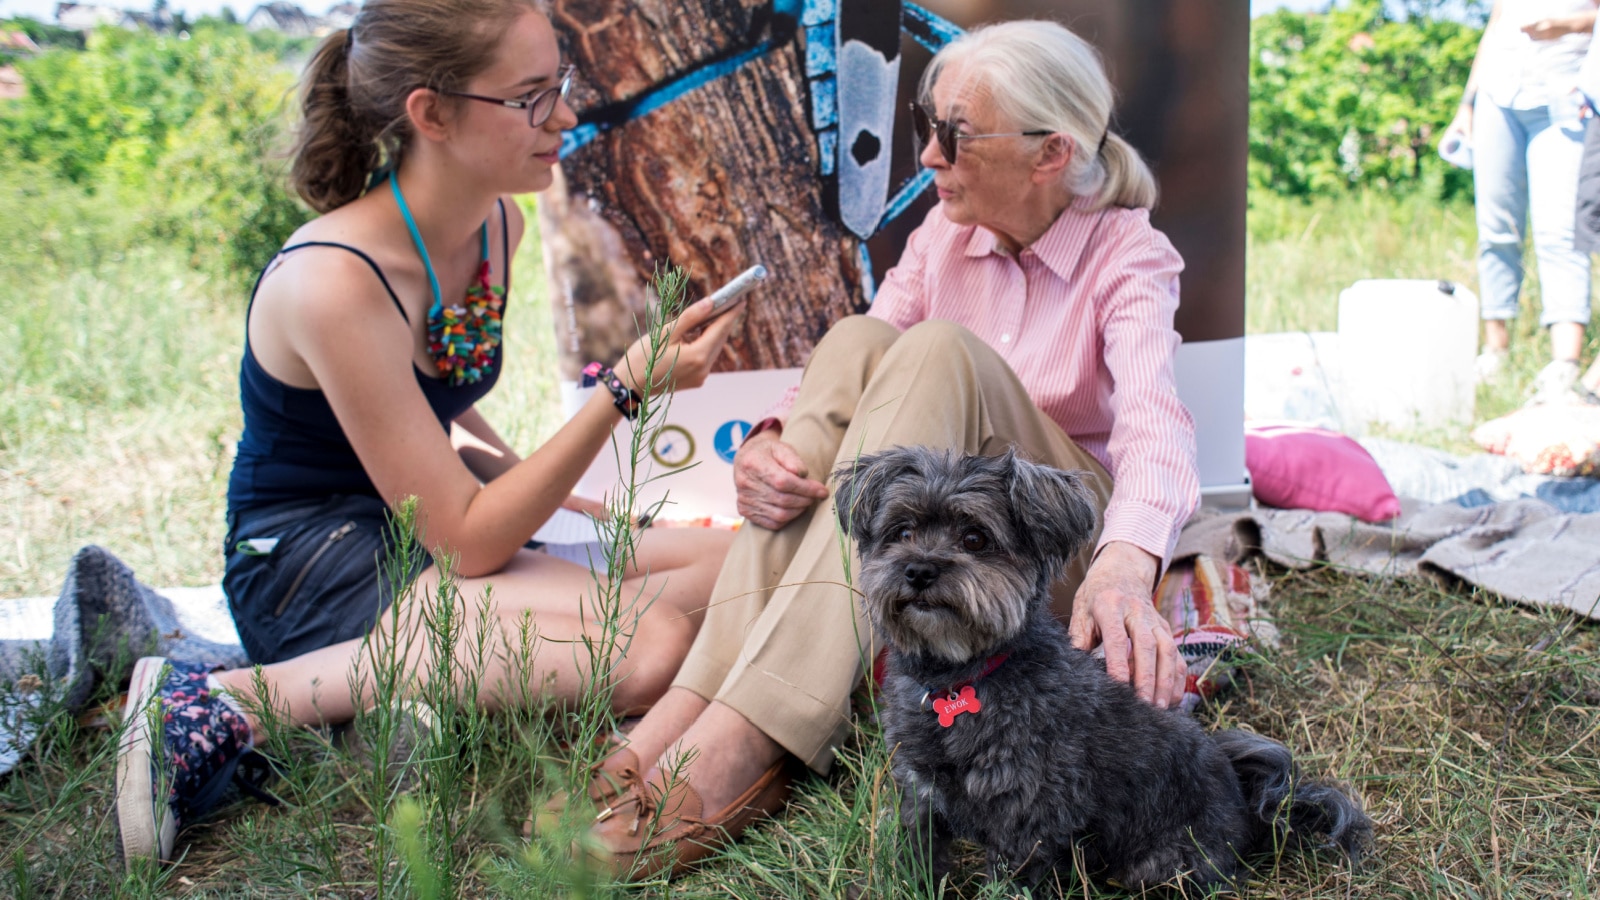 Budapest, Hungary - August 09, 2019: Jane Goodall petting a dog while interview